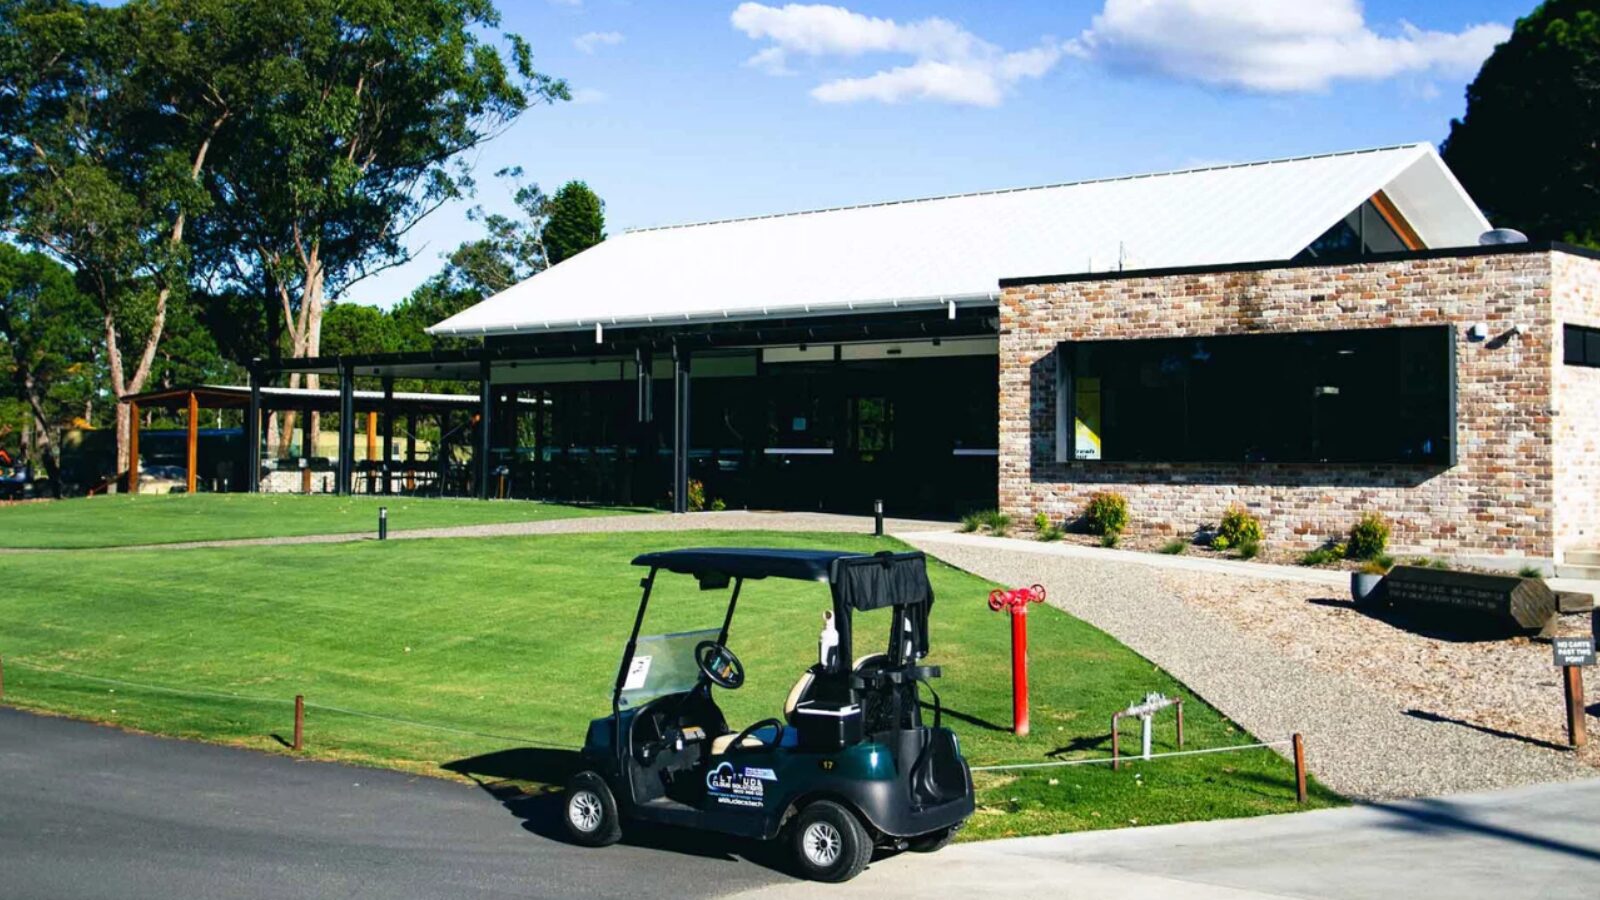 Tuncurry Golf Course clubhouse